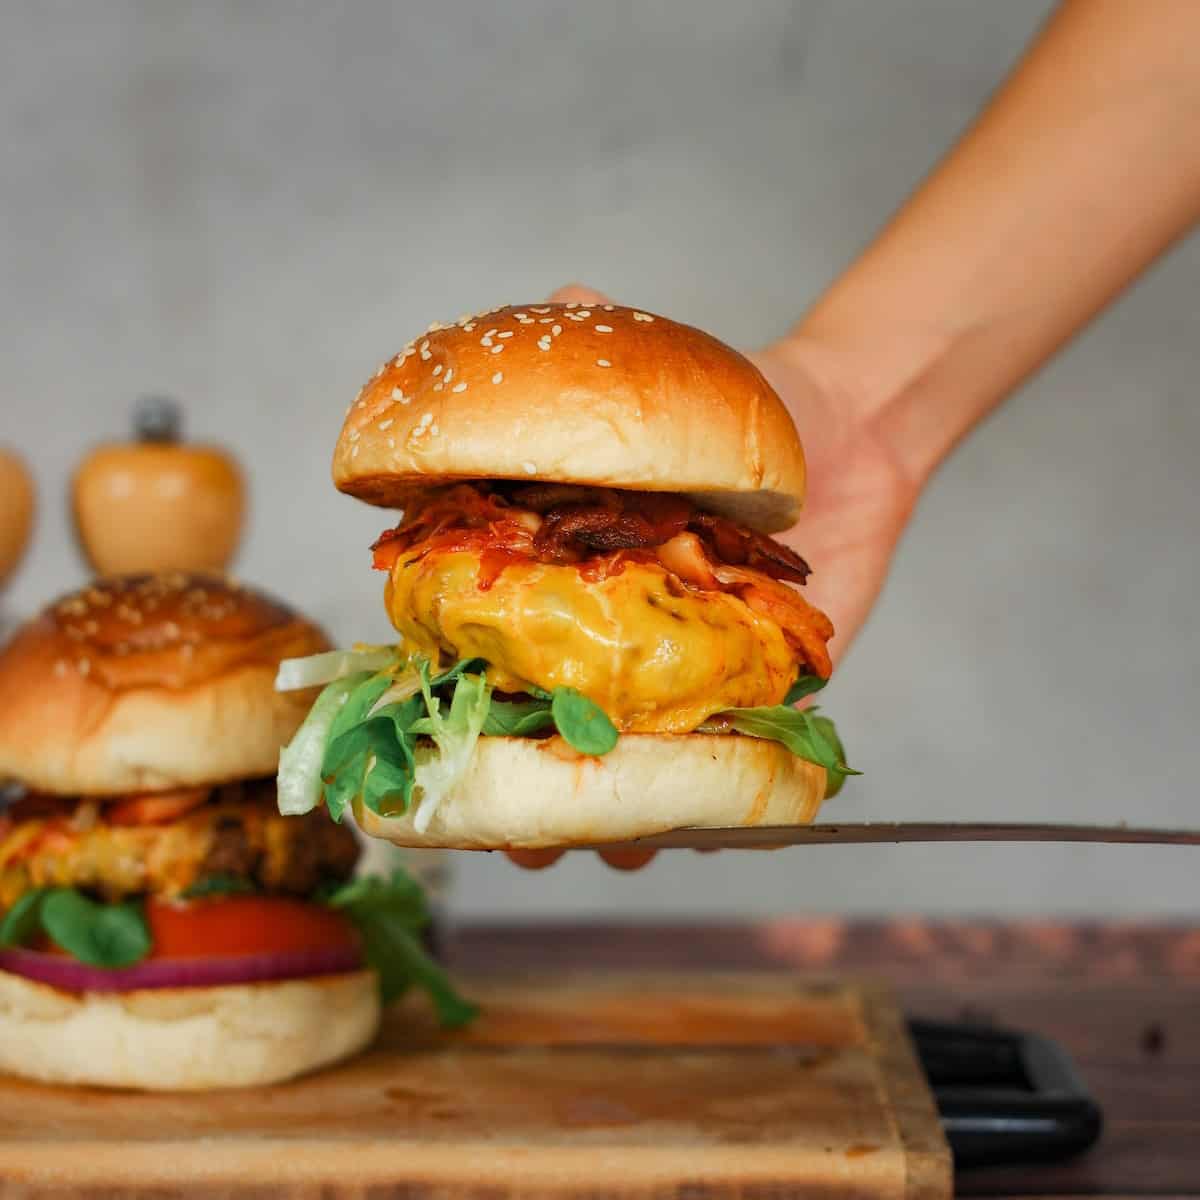 A person is holding a burger on a wooden cutting board.